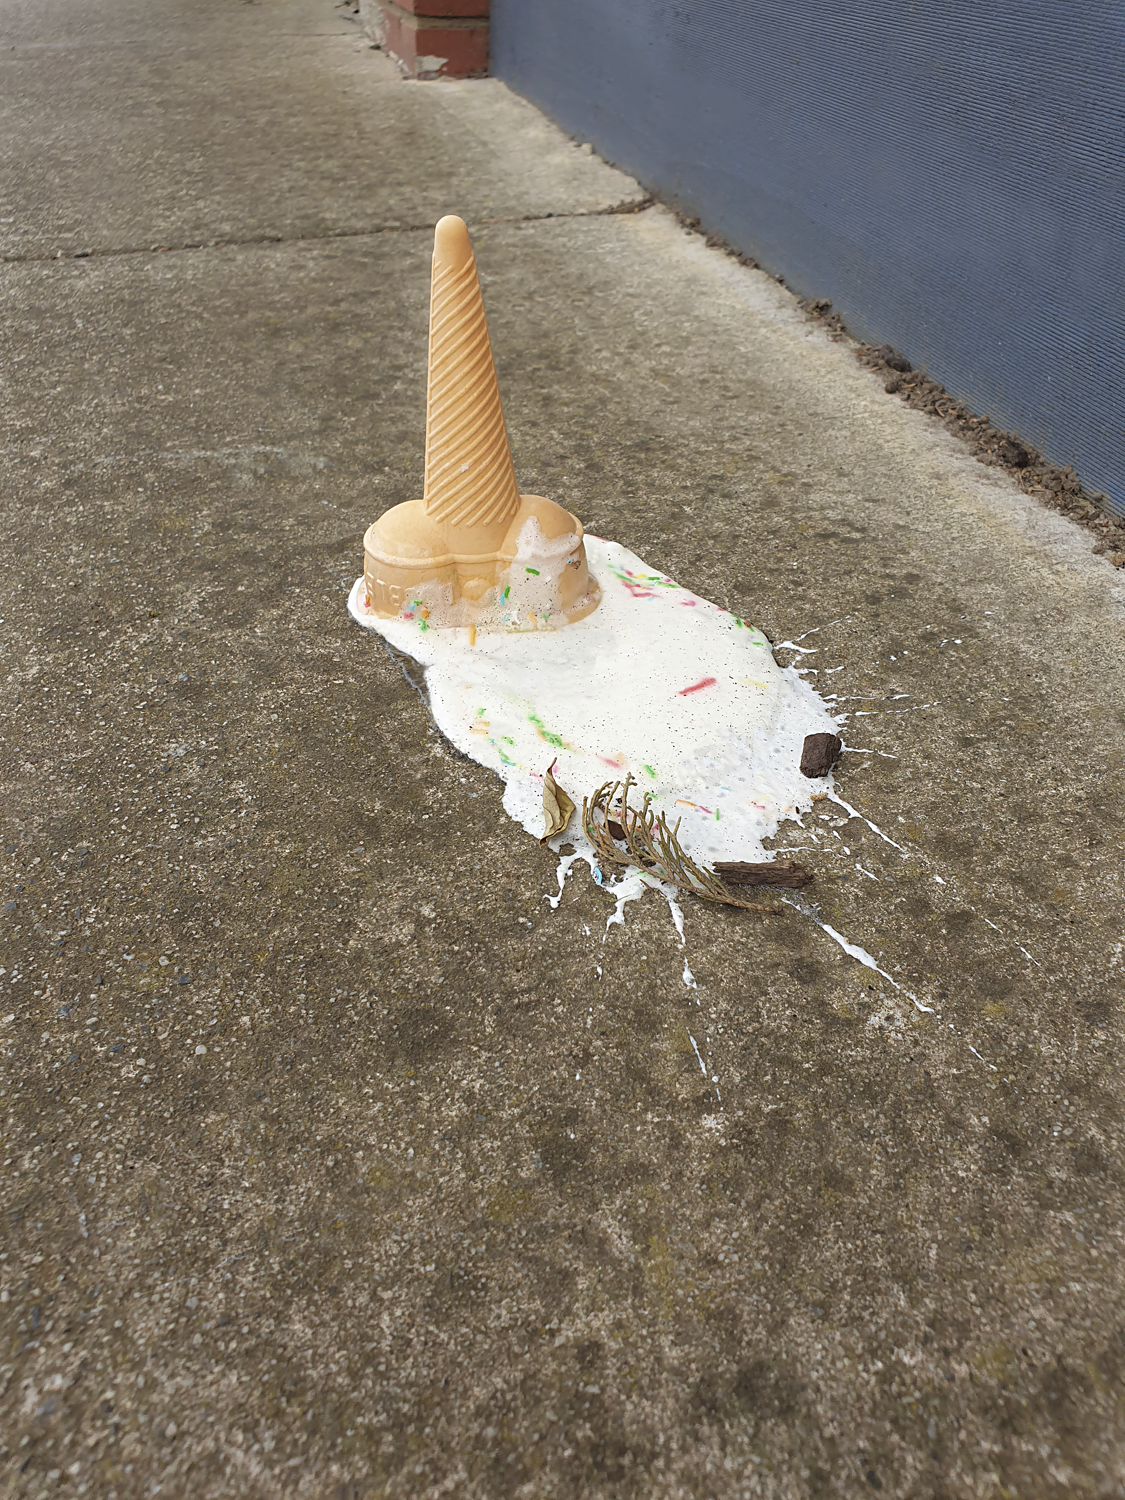 Colour photograph of upside down ice cream cone on melting ice cream on footpath.